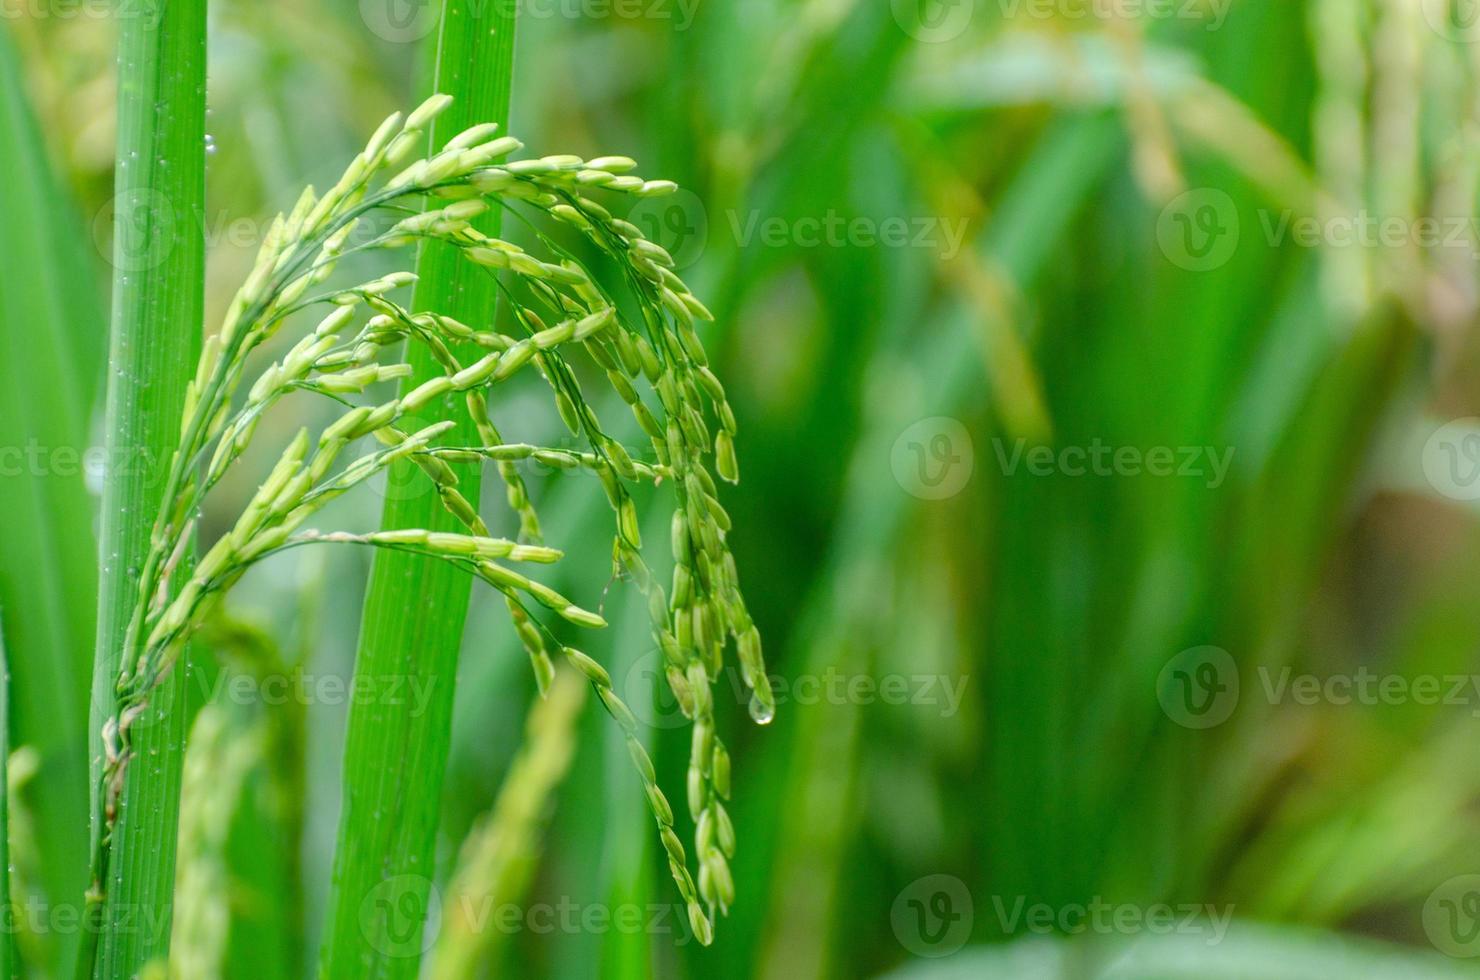 Nearly ripe green rice is in the lush green pasture Close-up photo